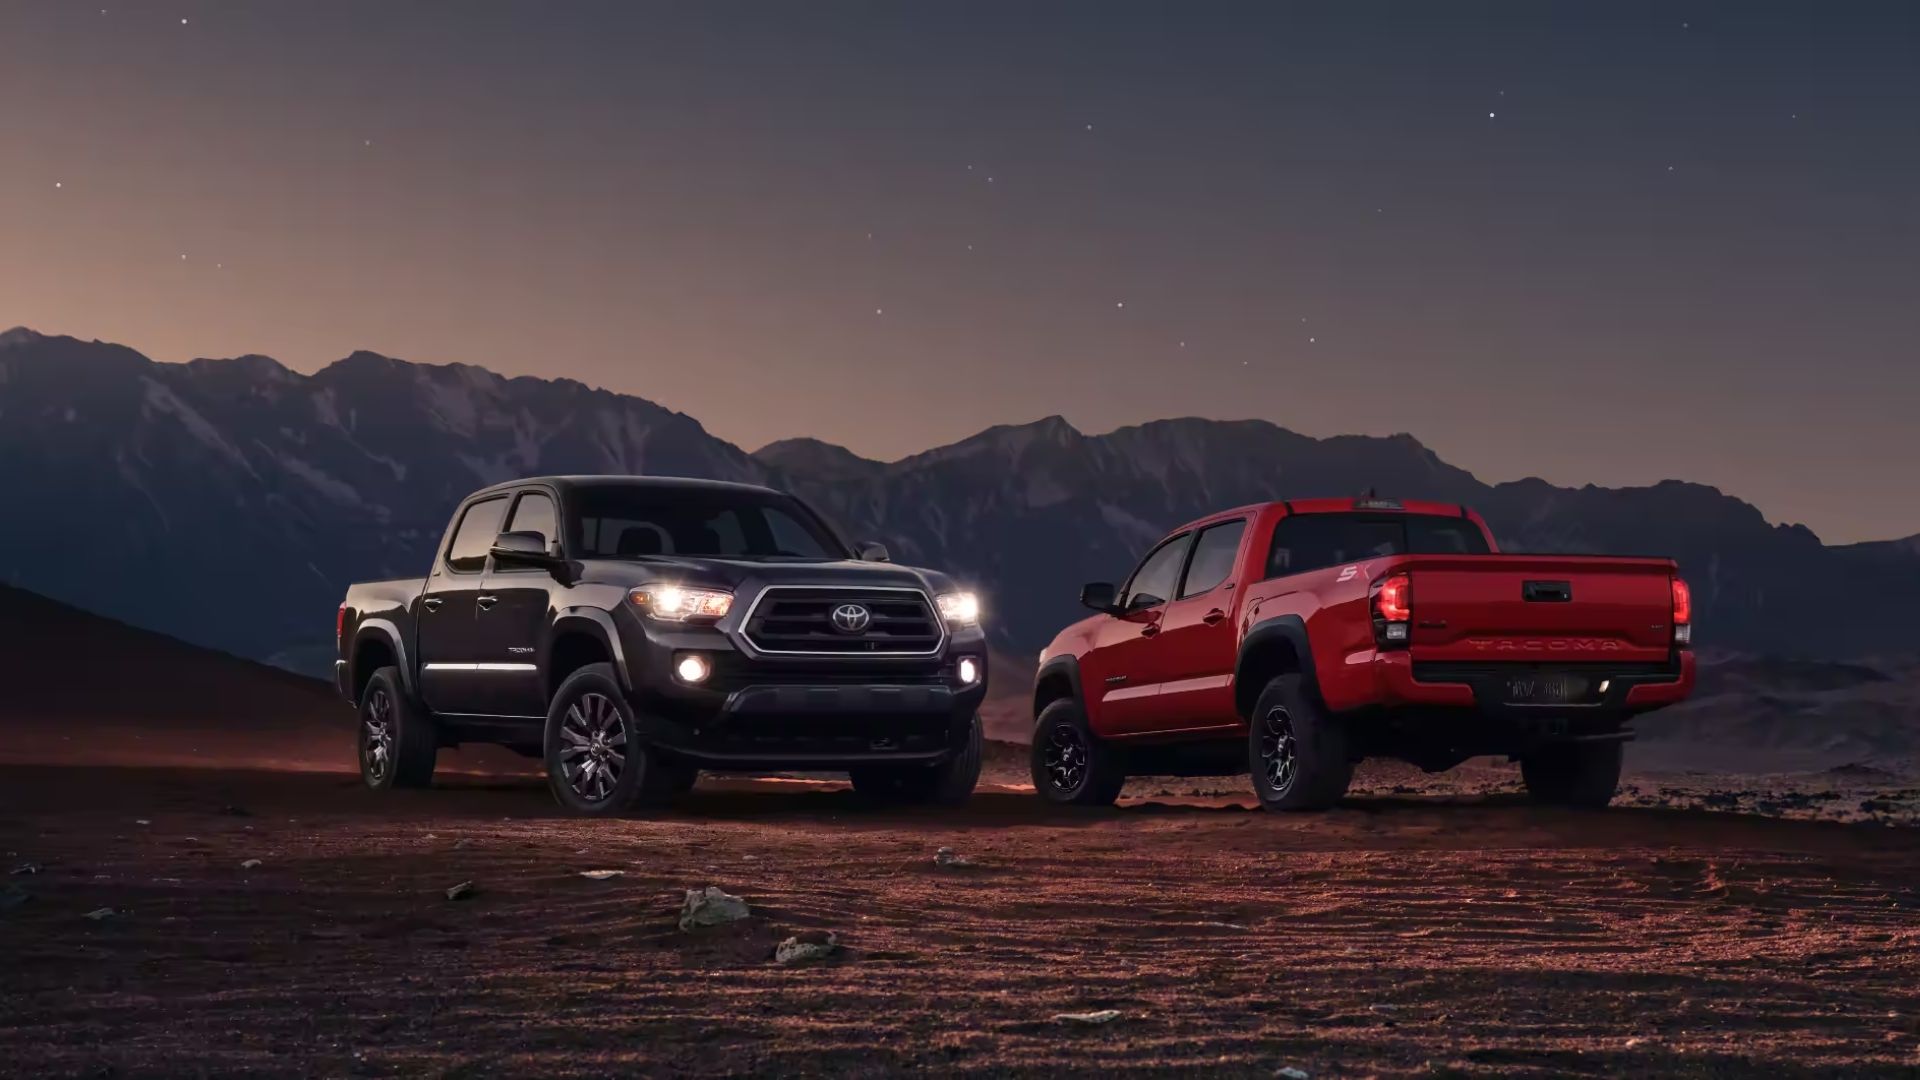 Why is now the right time to invest in an all-new Toyota Tacoma Hybrid?